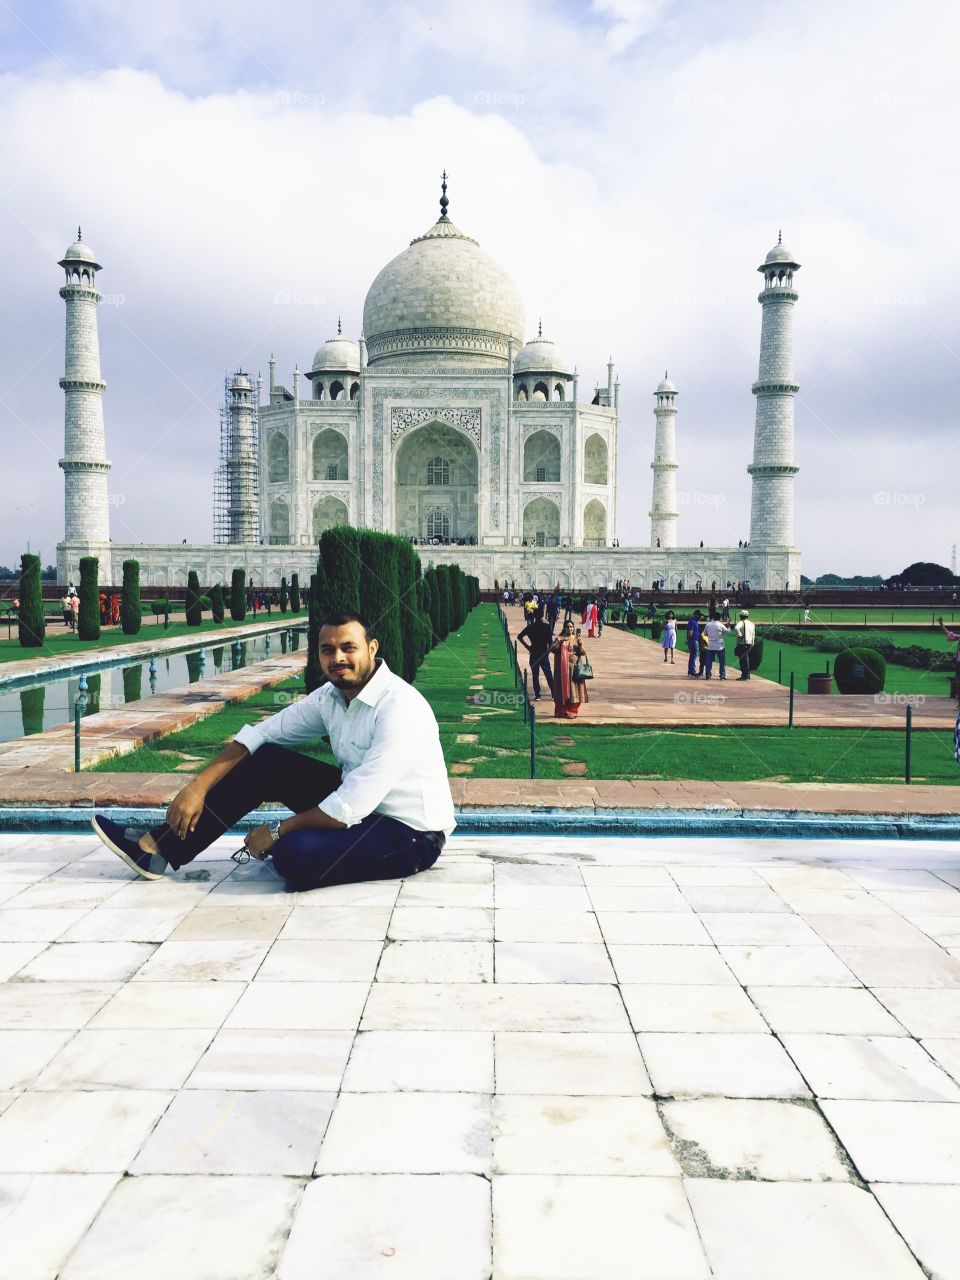 Awesome click in front of Taj Mahal